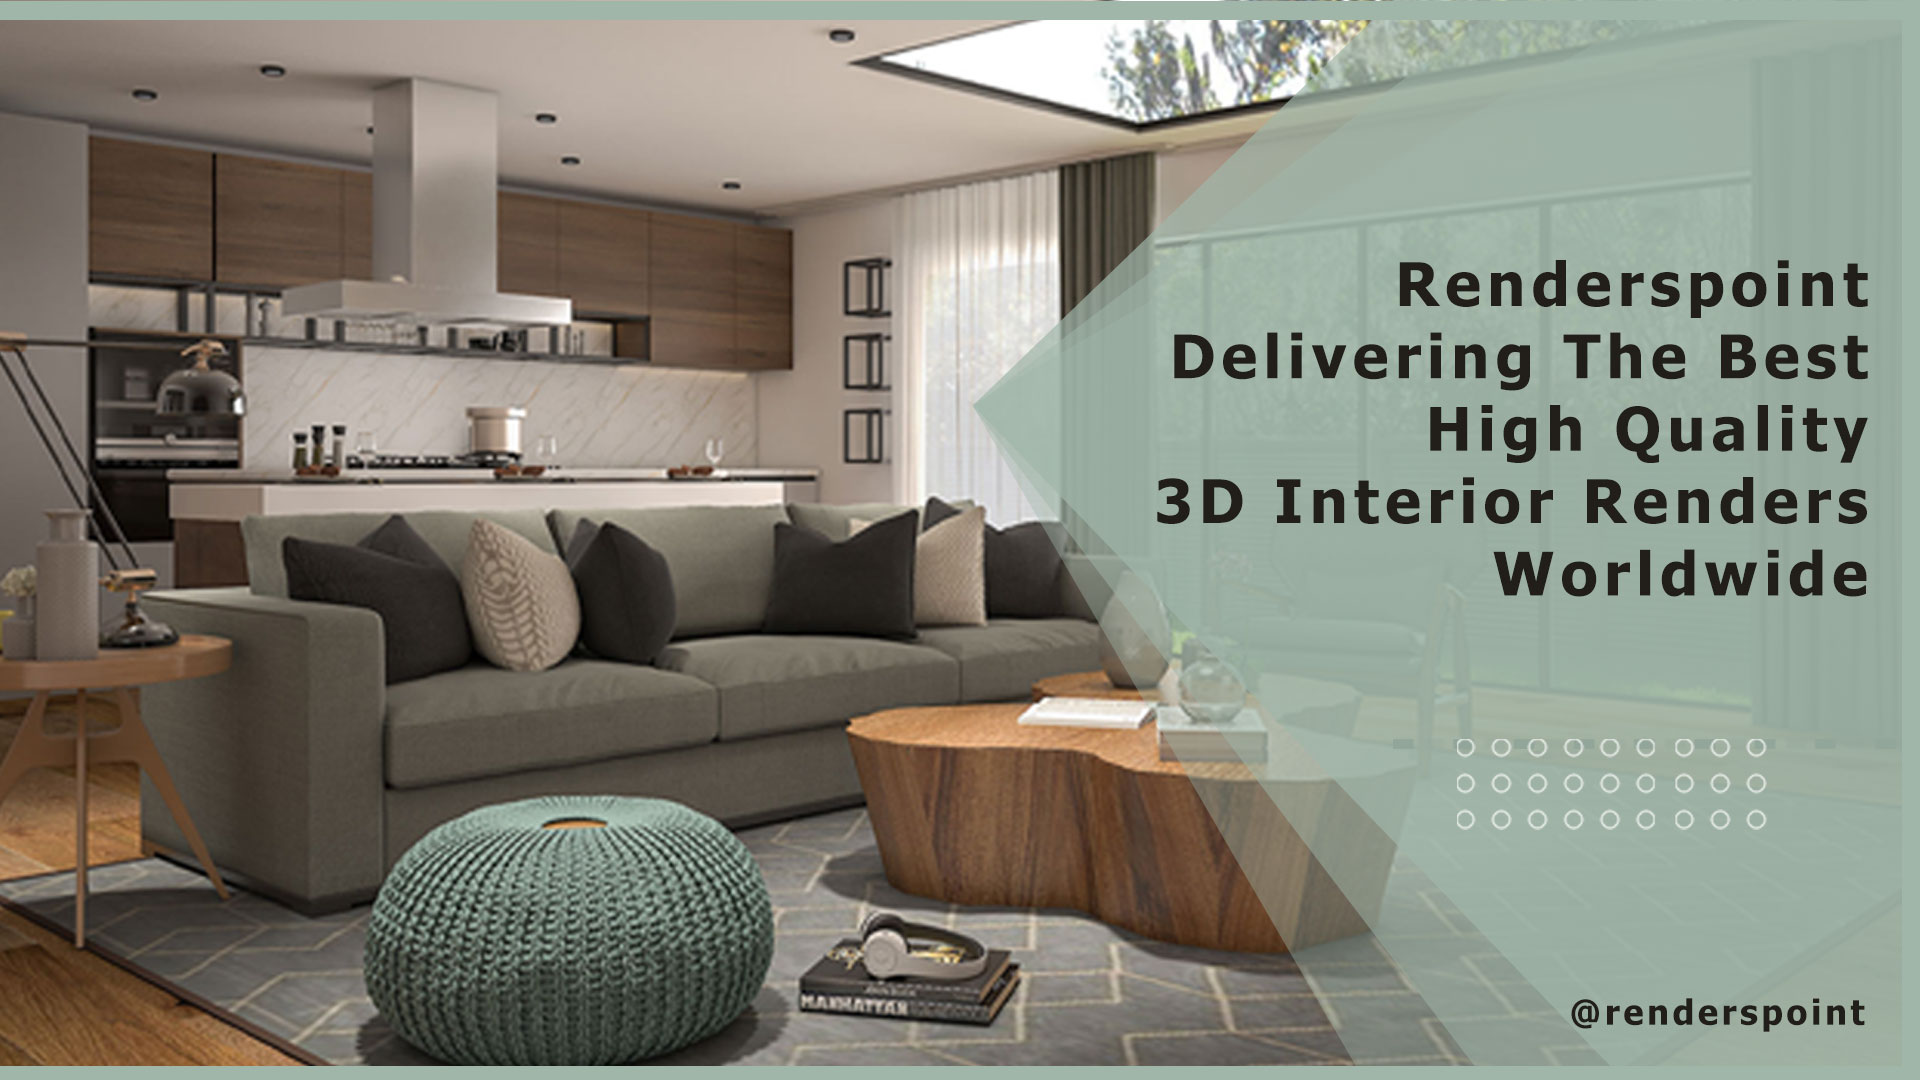 Renderspoint Delivering the Best High Quality 3D Interior Renders Worldwide